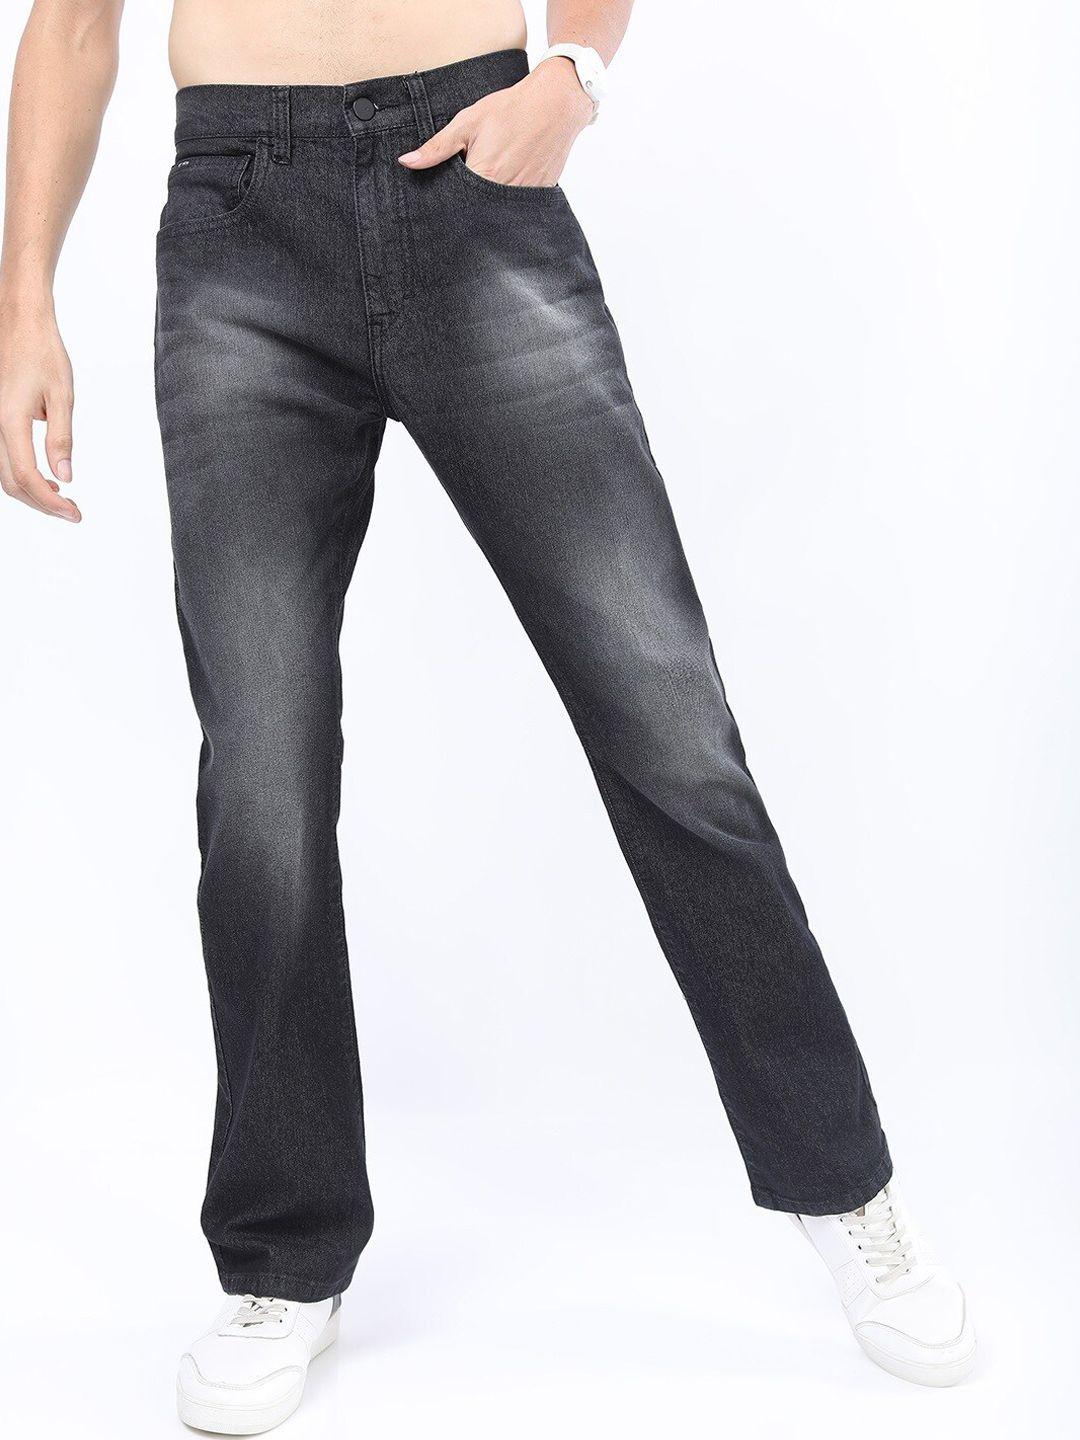 ketch-men-charcoal-bootcut-light-fade-stretchable-jeans